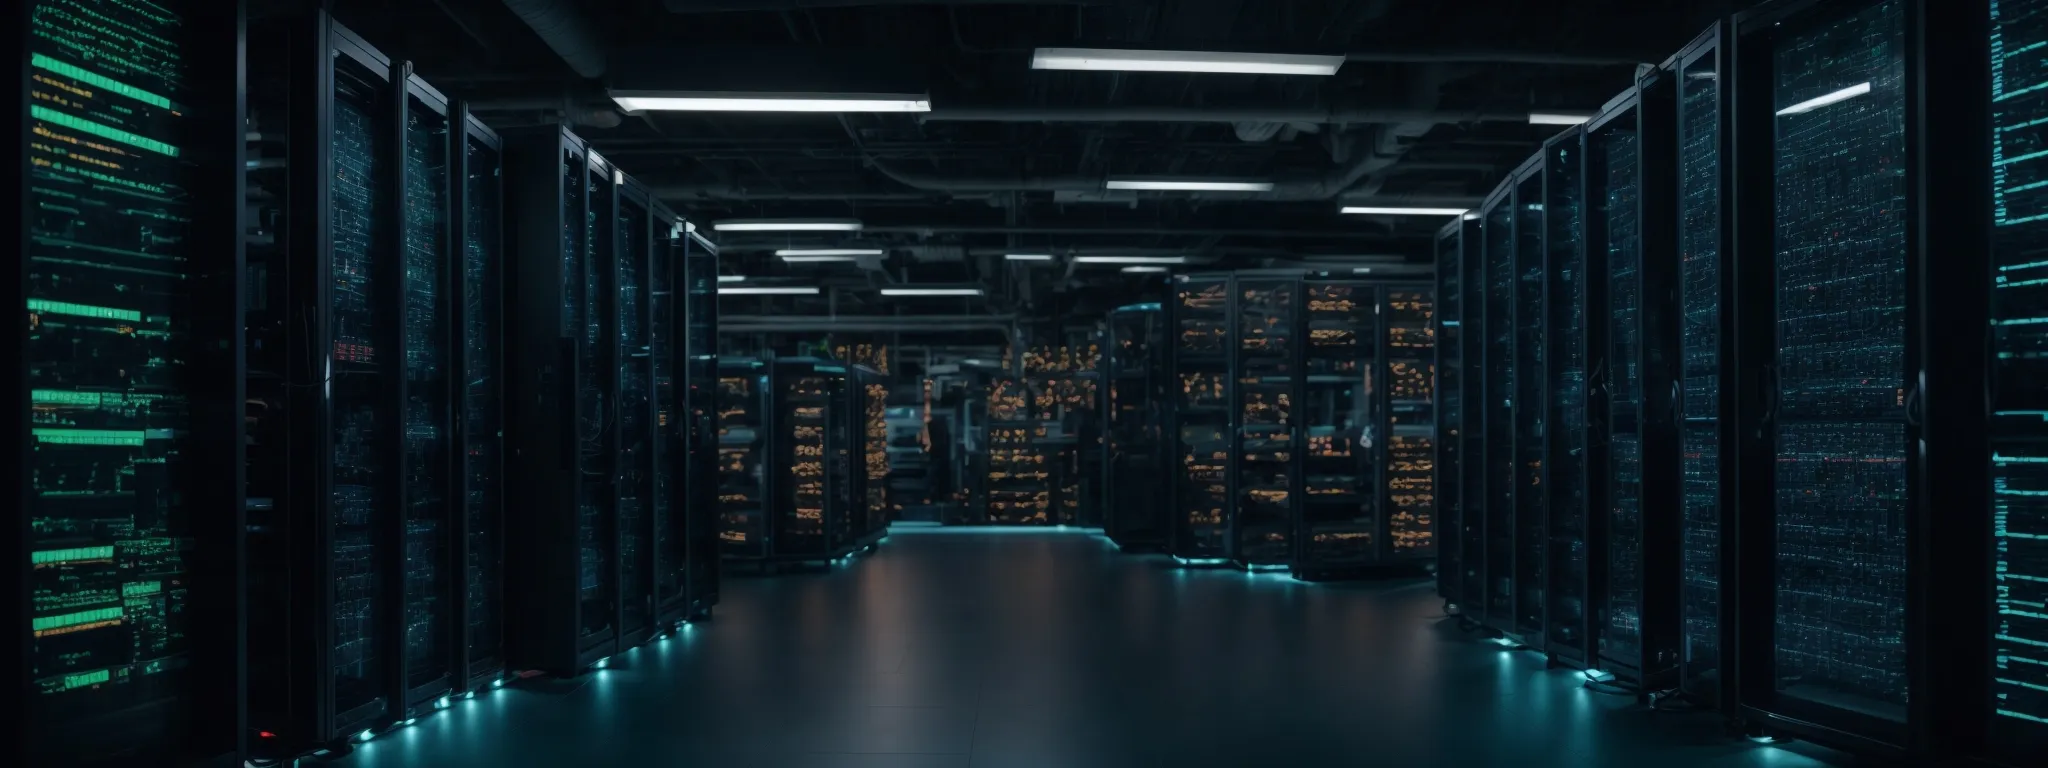 a server room with rows of computer racks and a central monitoring screen displaying a data analytics dashboard.